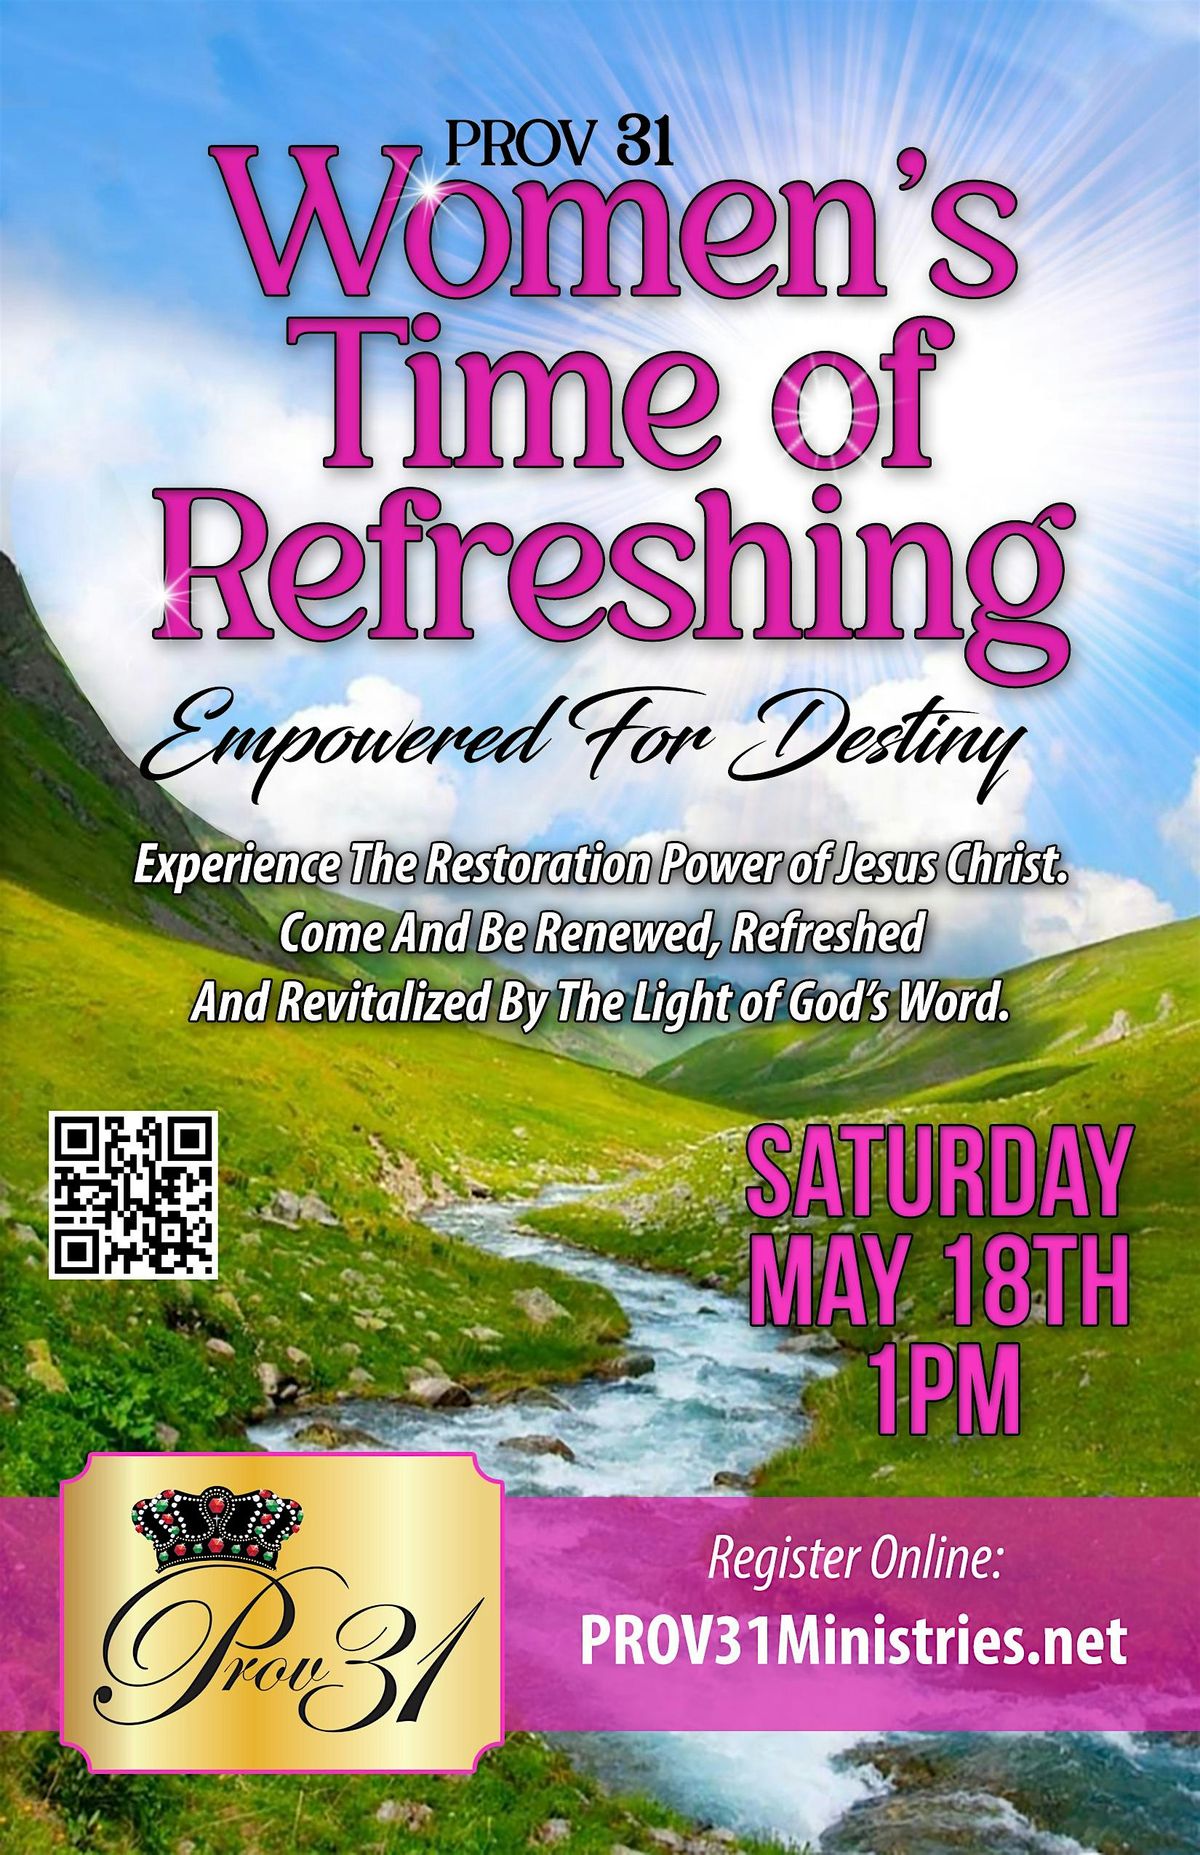 PROV 31 WOMEN'S TIME OF REFRESHING LUNCHEON